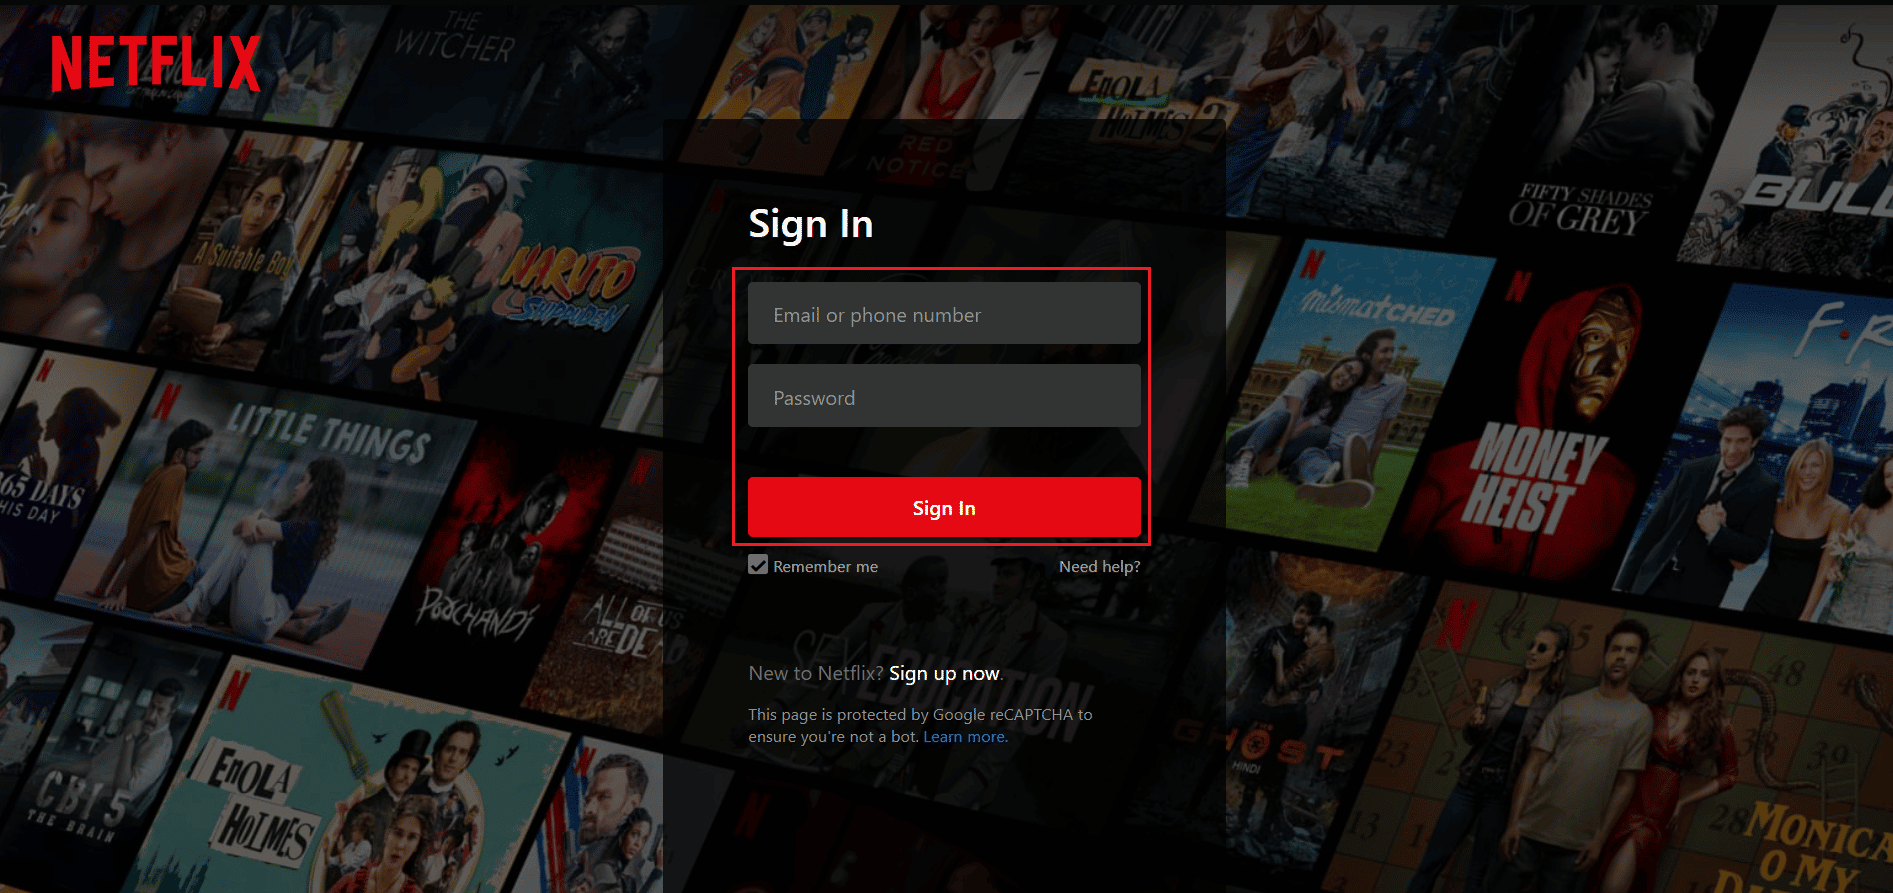 Visit the Netflix website on your browser and Sign In to your account with the account credentials